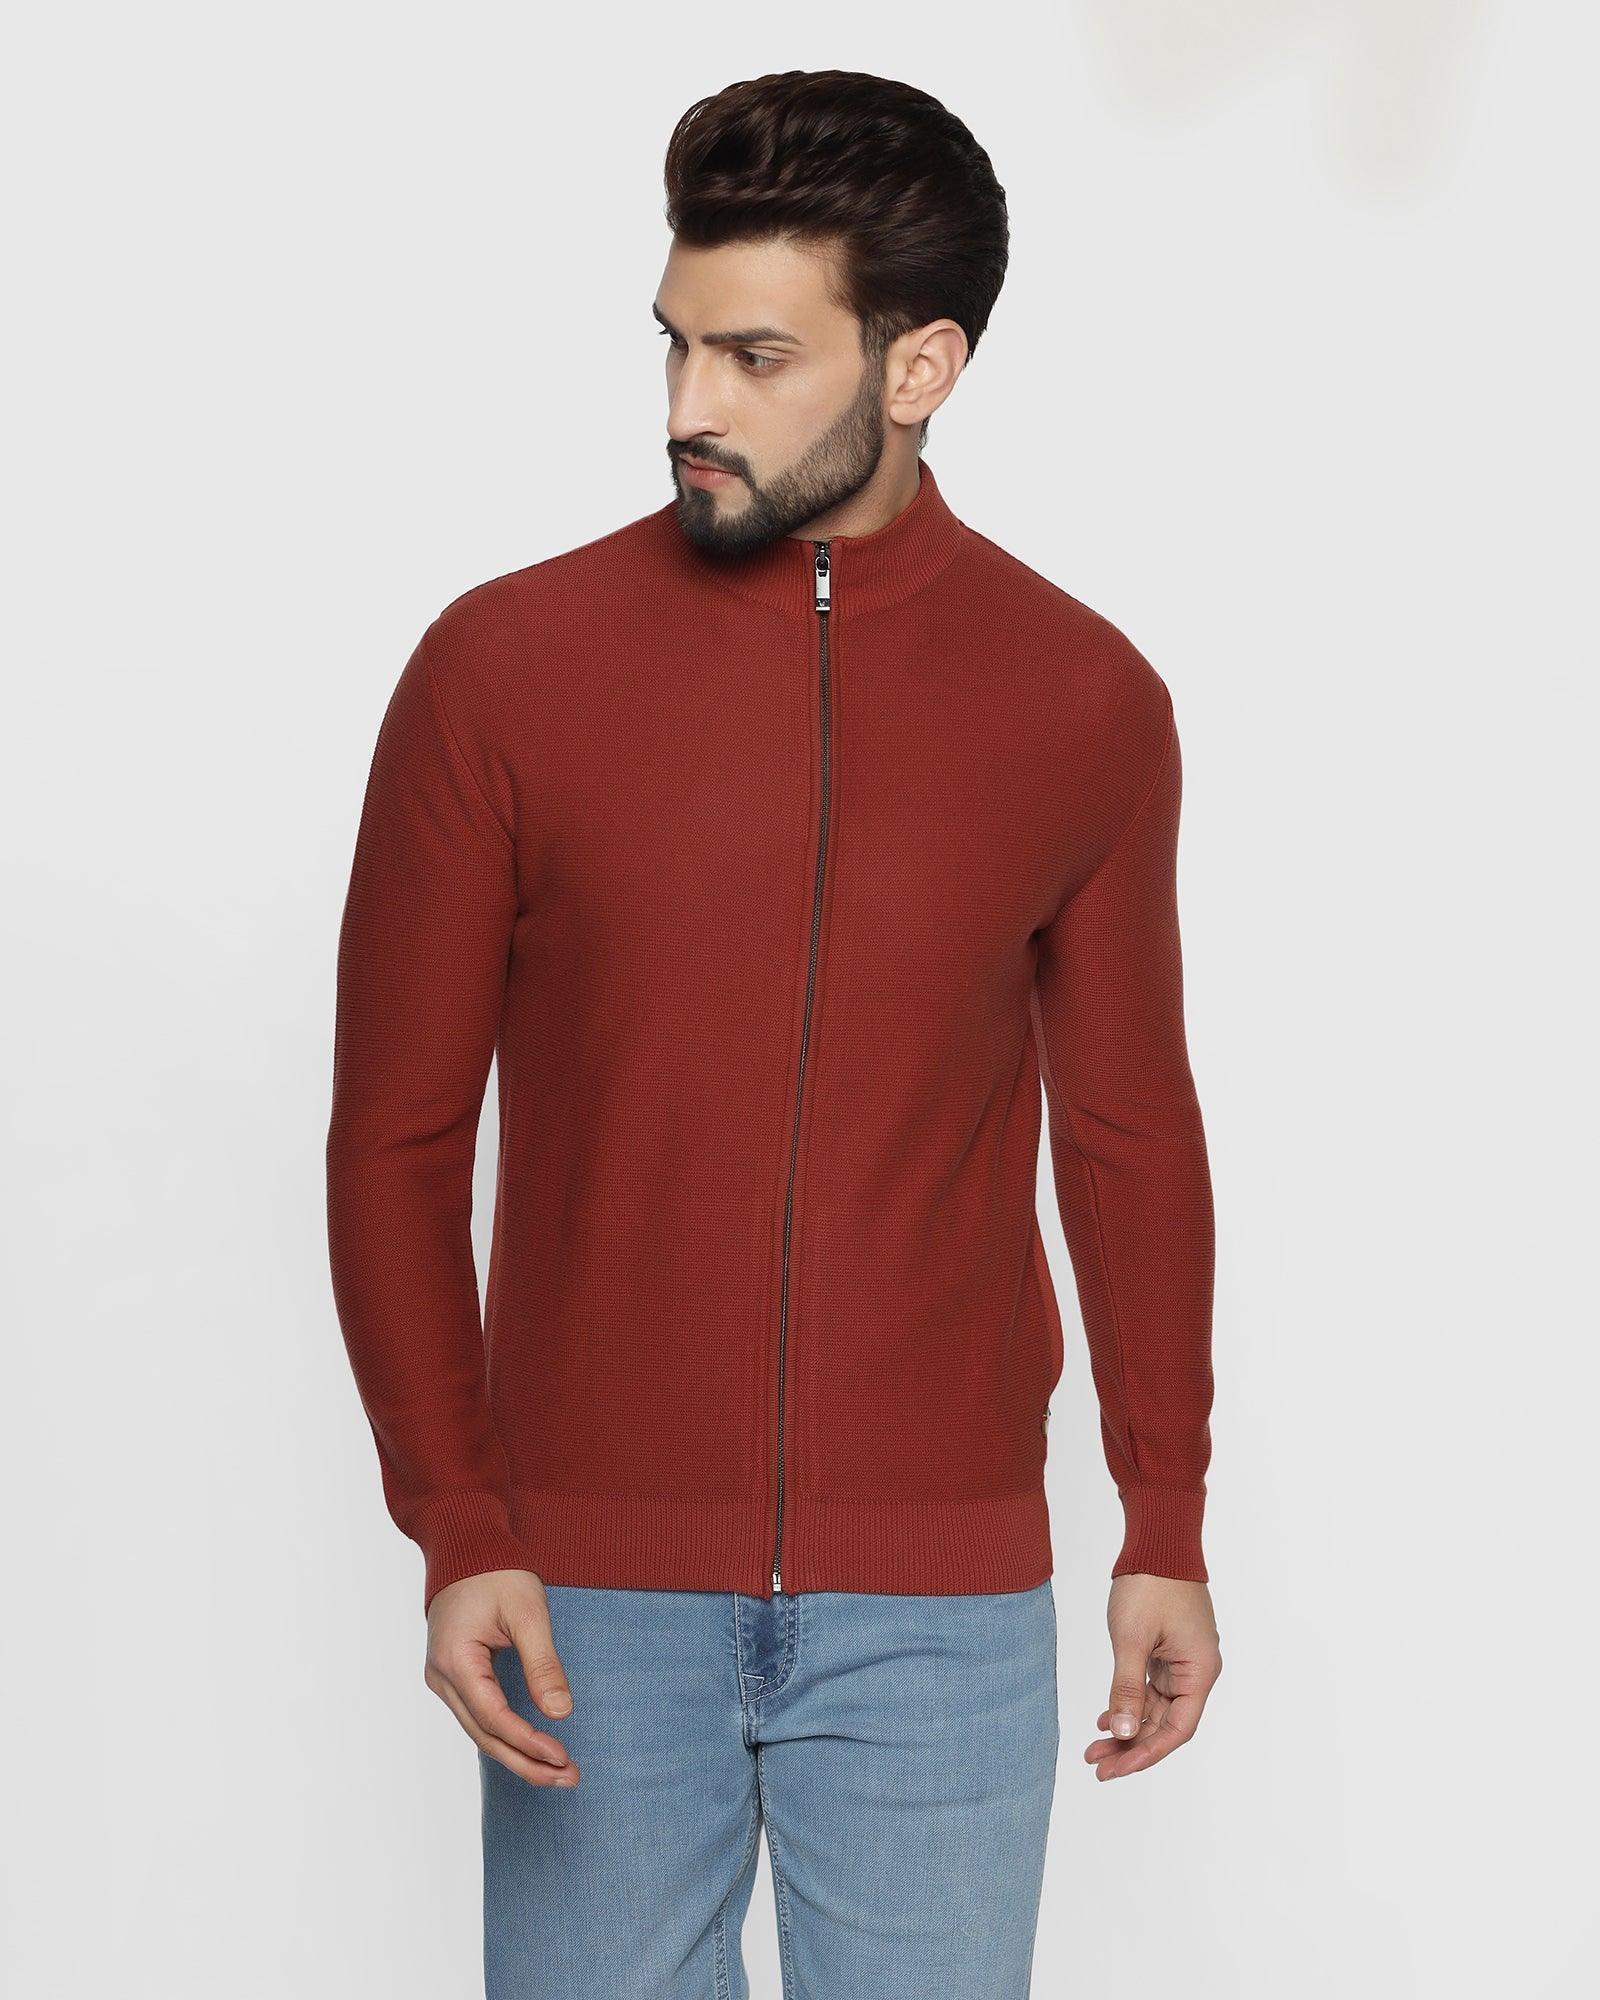 stylized collar rust solid sweater - christopher